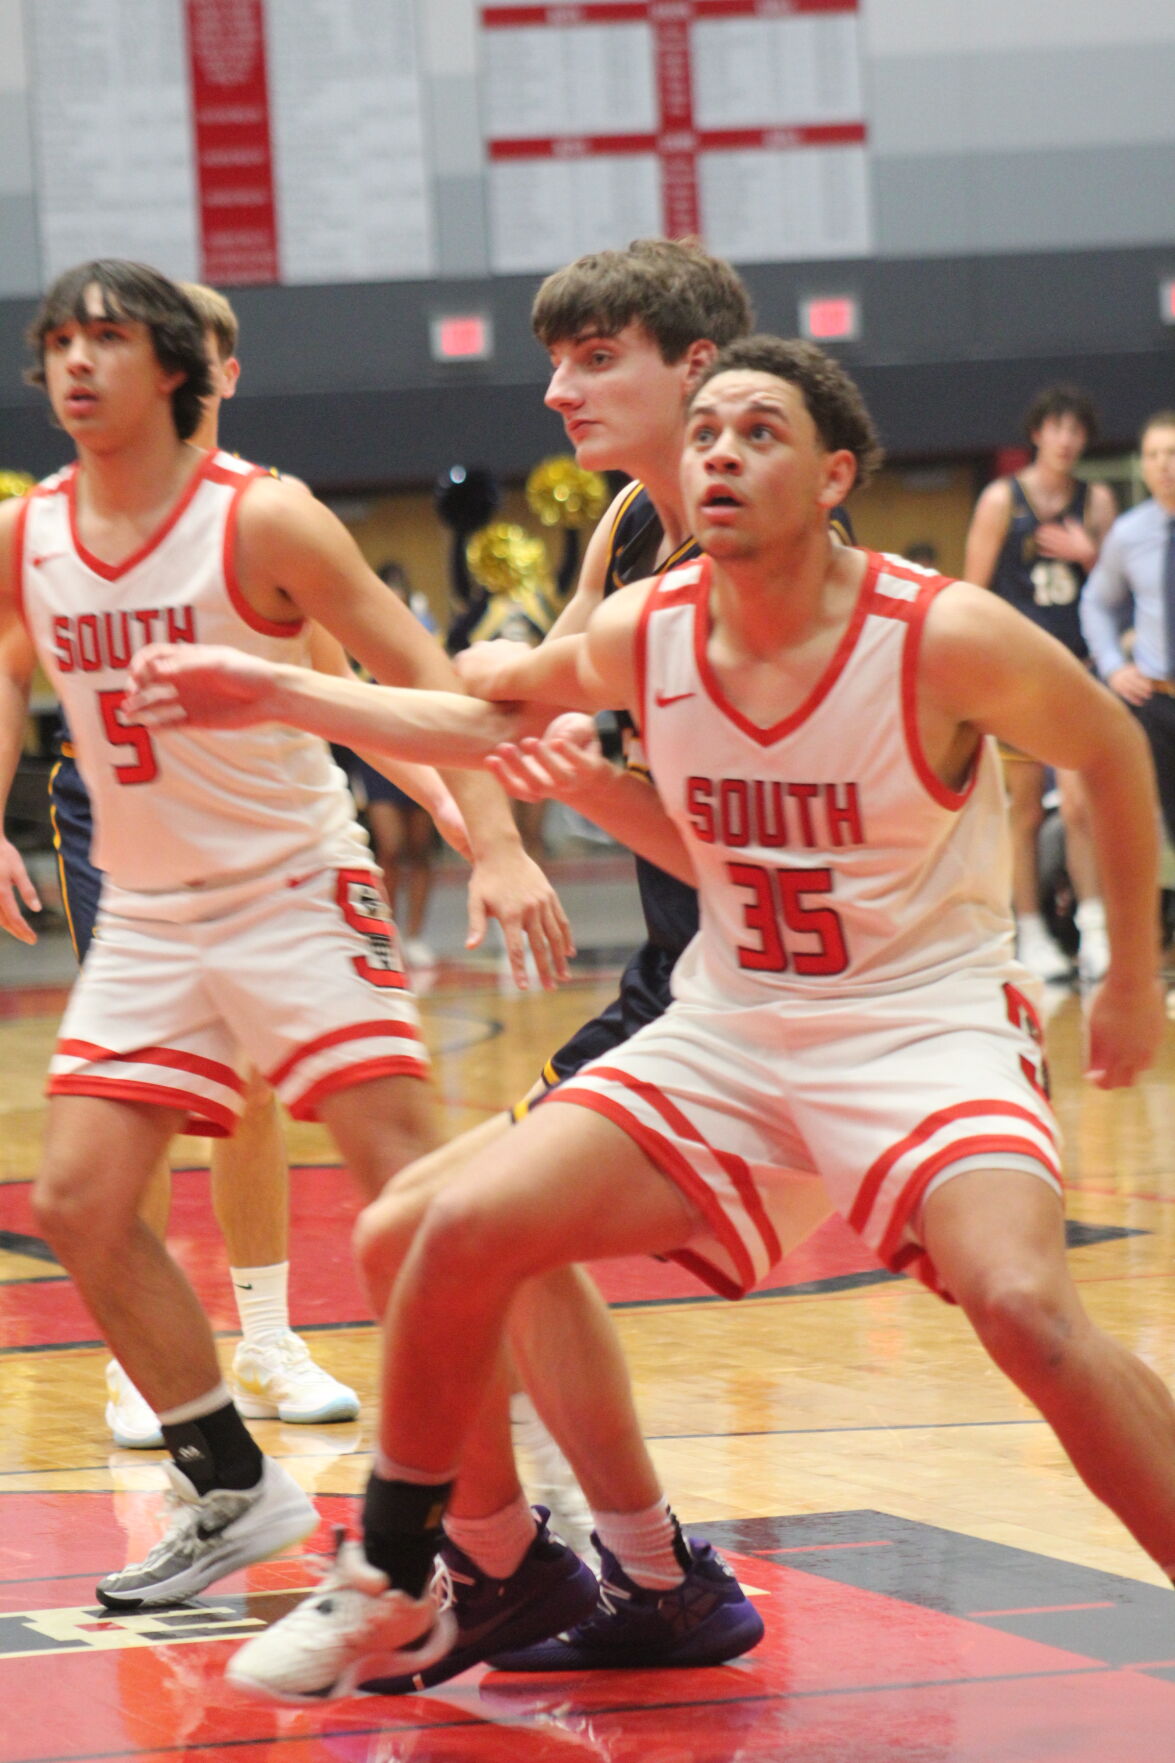 Sheboygan South Wins Against Golden Raiders with a 68-61 Victory